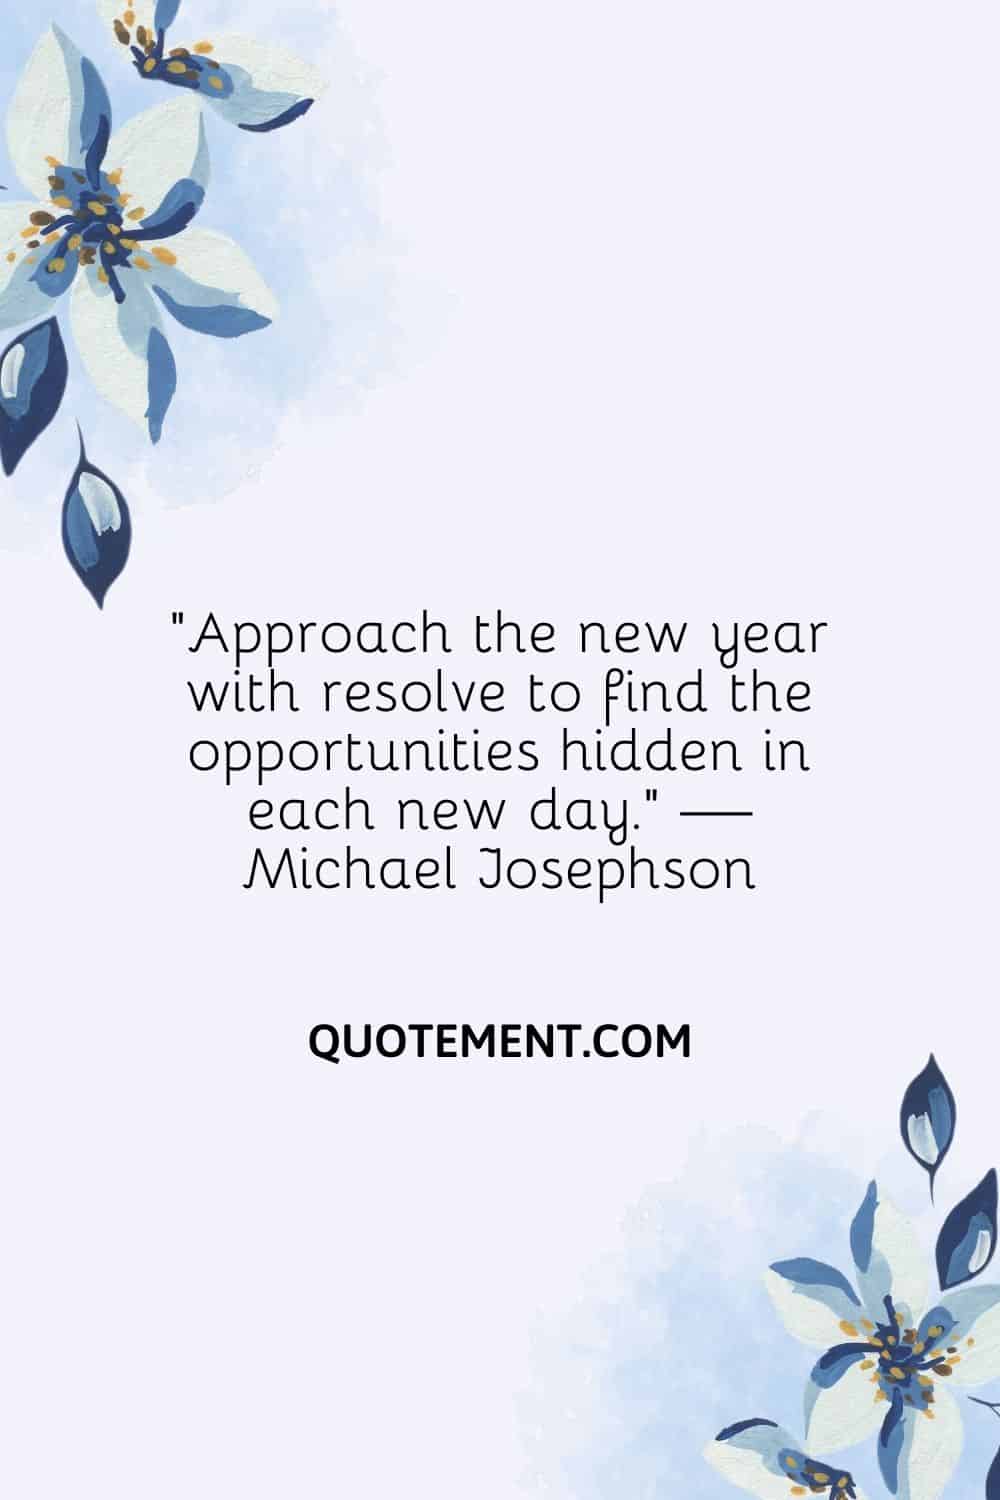 Approach the new year with resolve to find the opportunities hidden in each new day